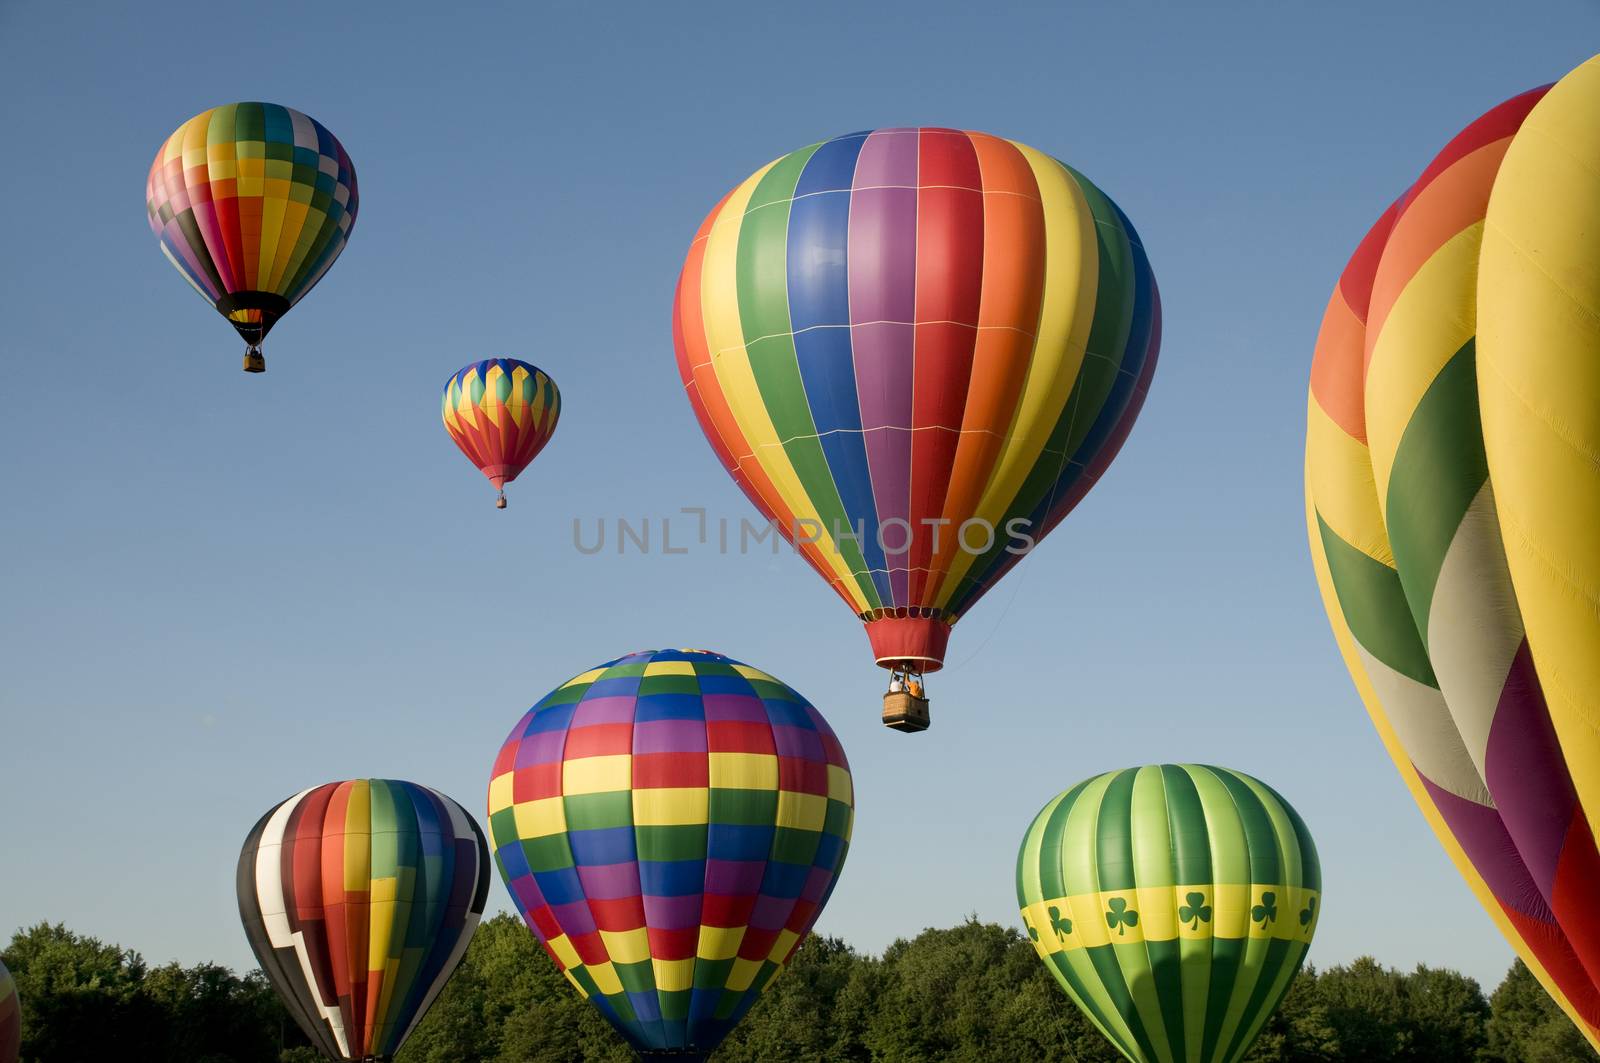 Hot-air balloons ascending or launching at a ballooning festival by Balefire9